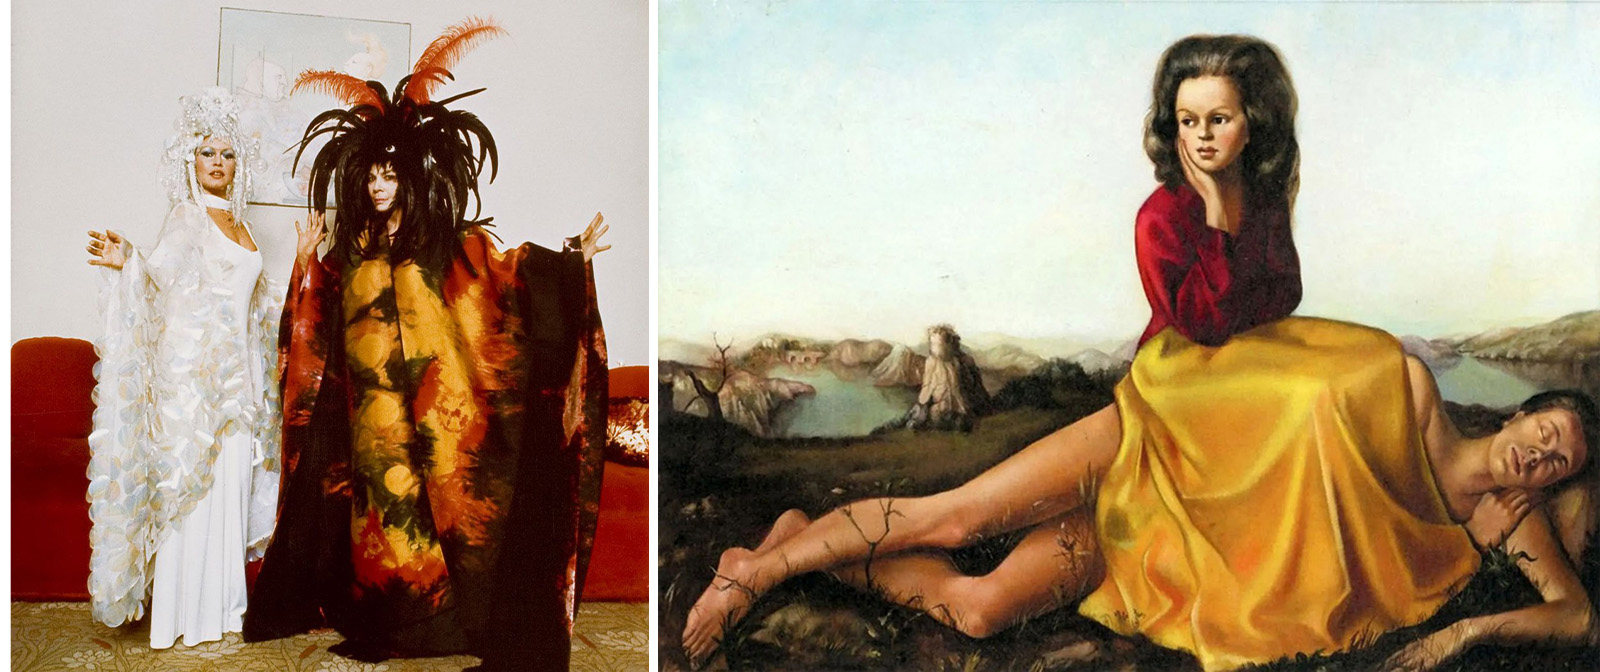 The extravagant artwork and unusual personal life of feminist and artist Leonor Fini